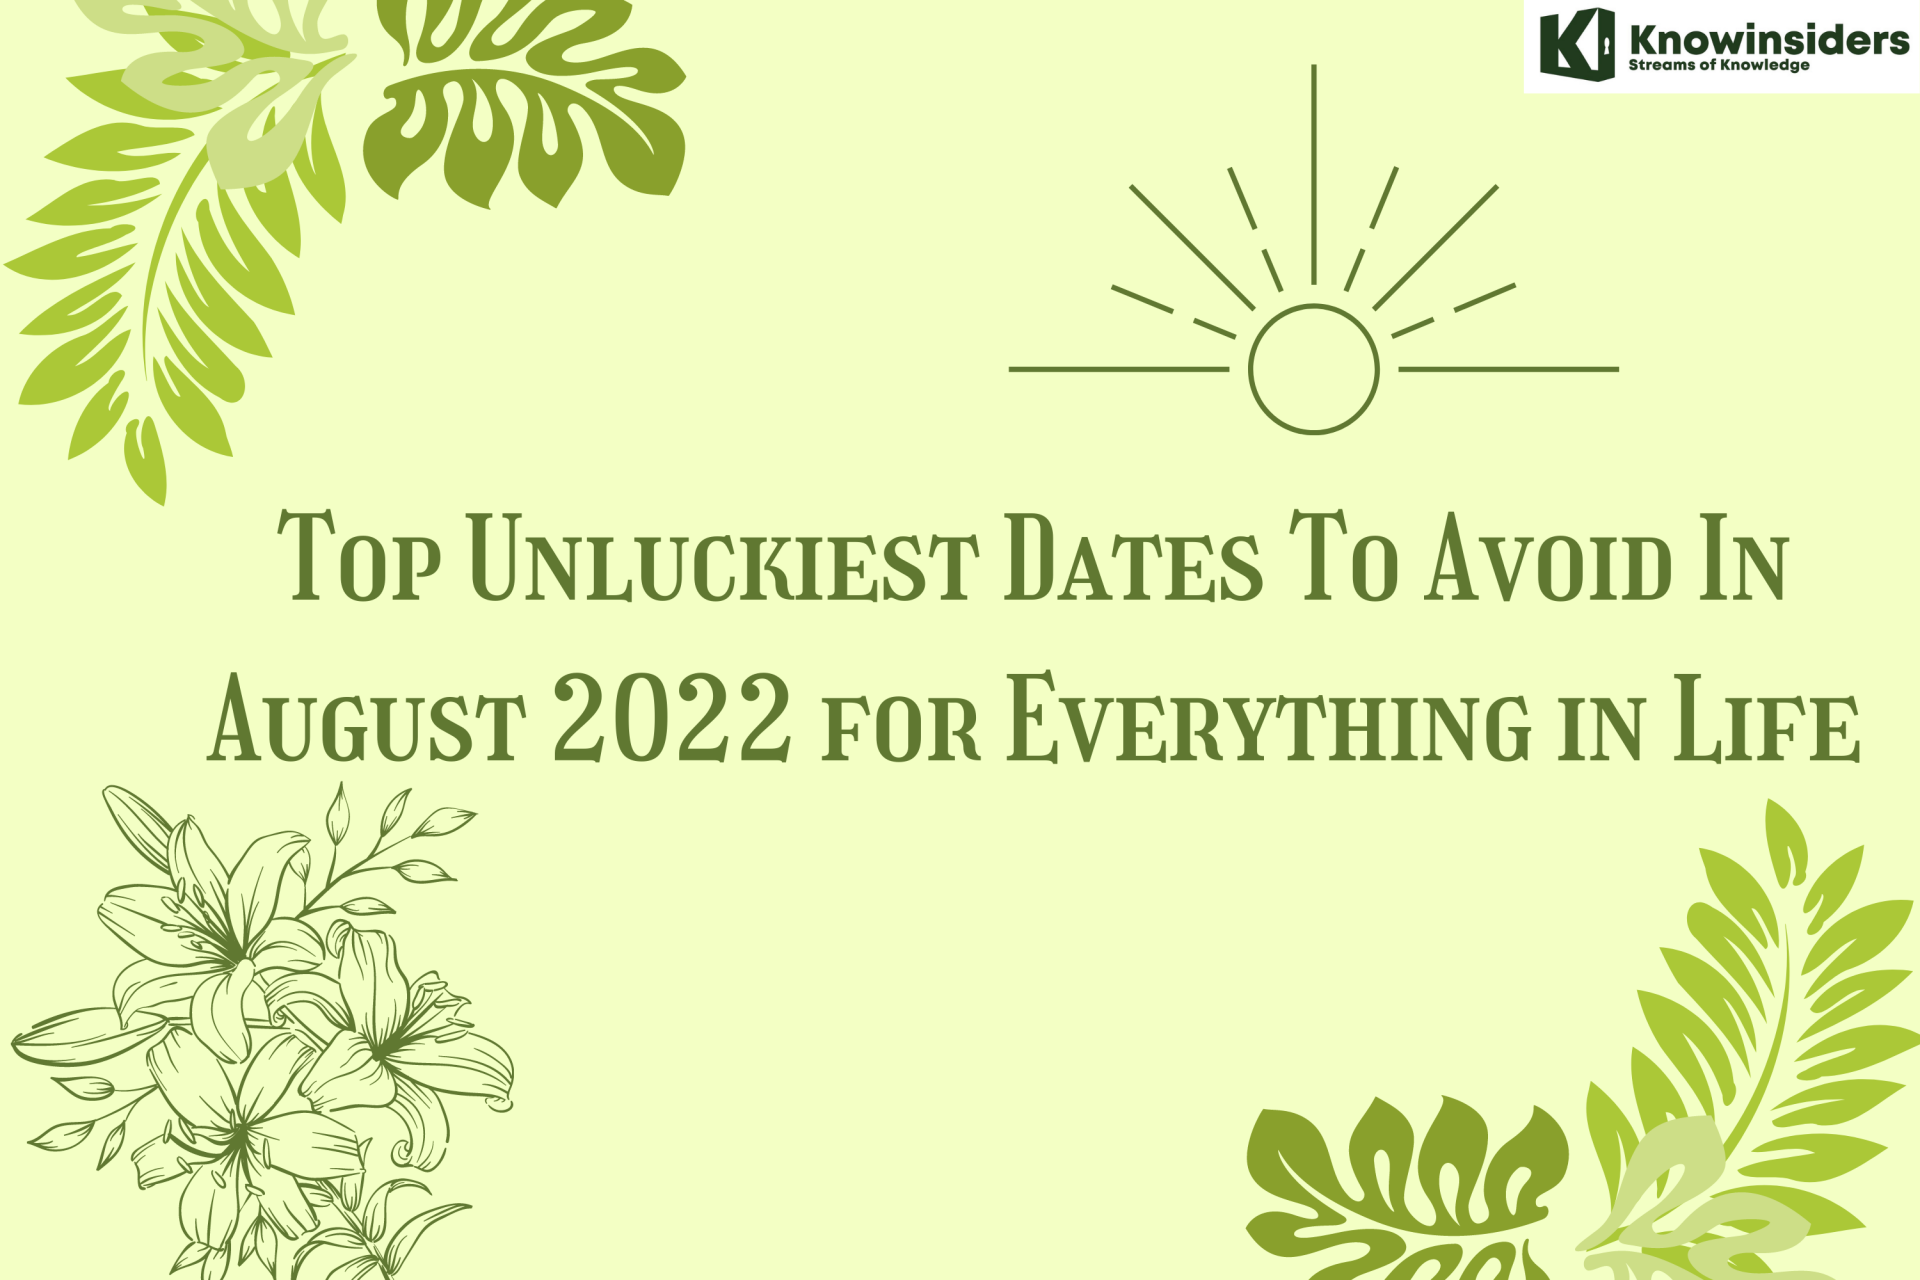 Top Unluckiest Dates To Avoid In August 2022 for Everything in Life